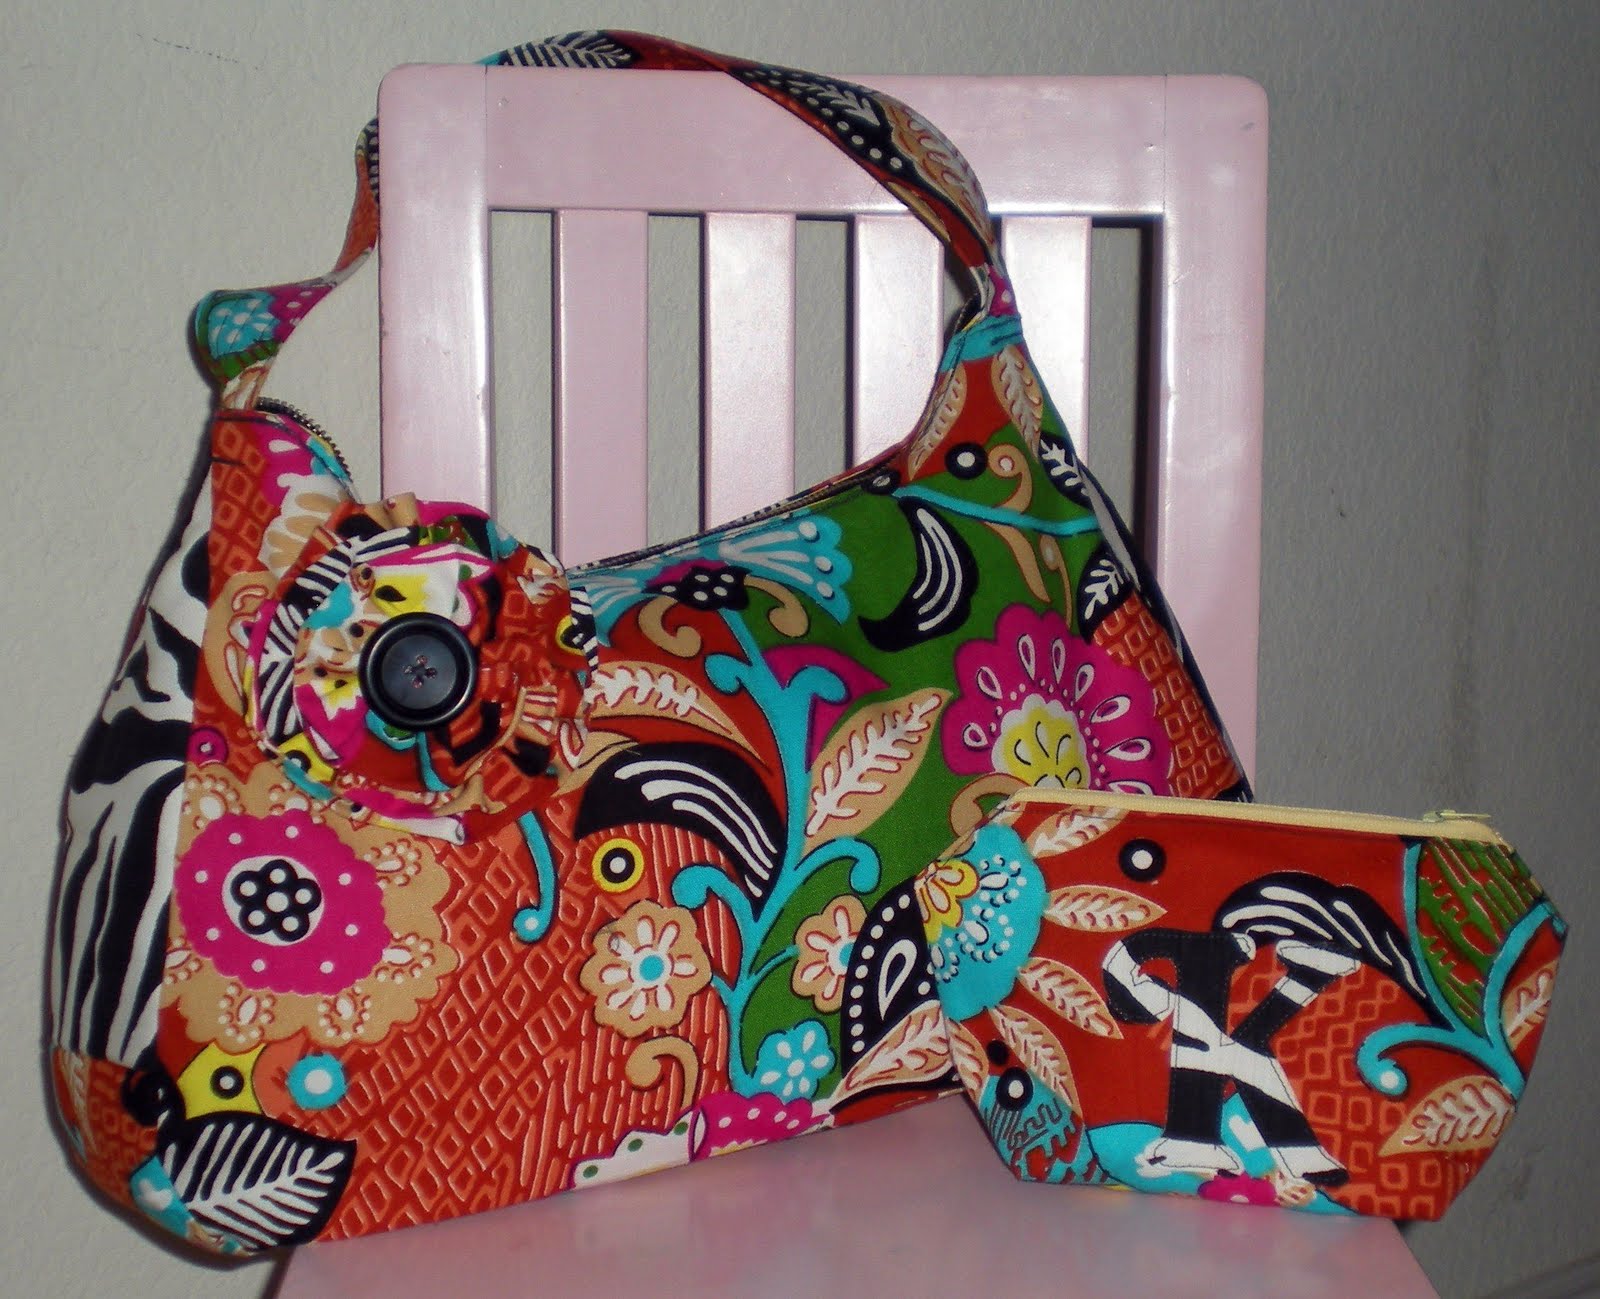 Finding a Free Purse Pattern You Can Sew
- EzineArticles